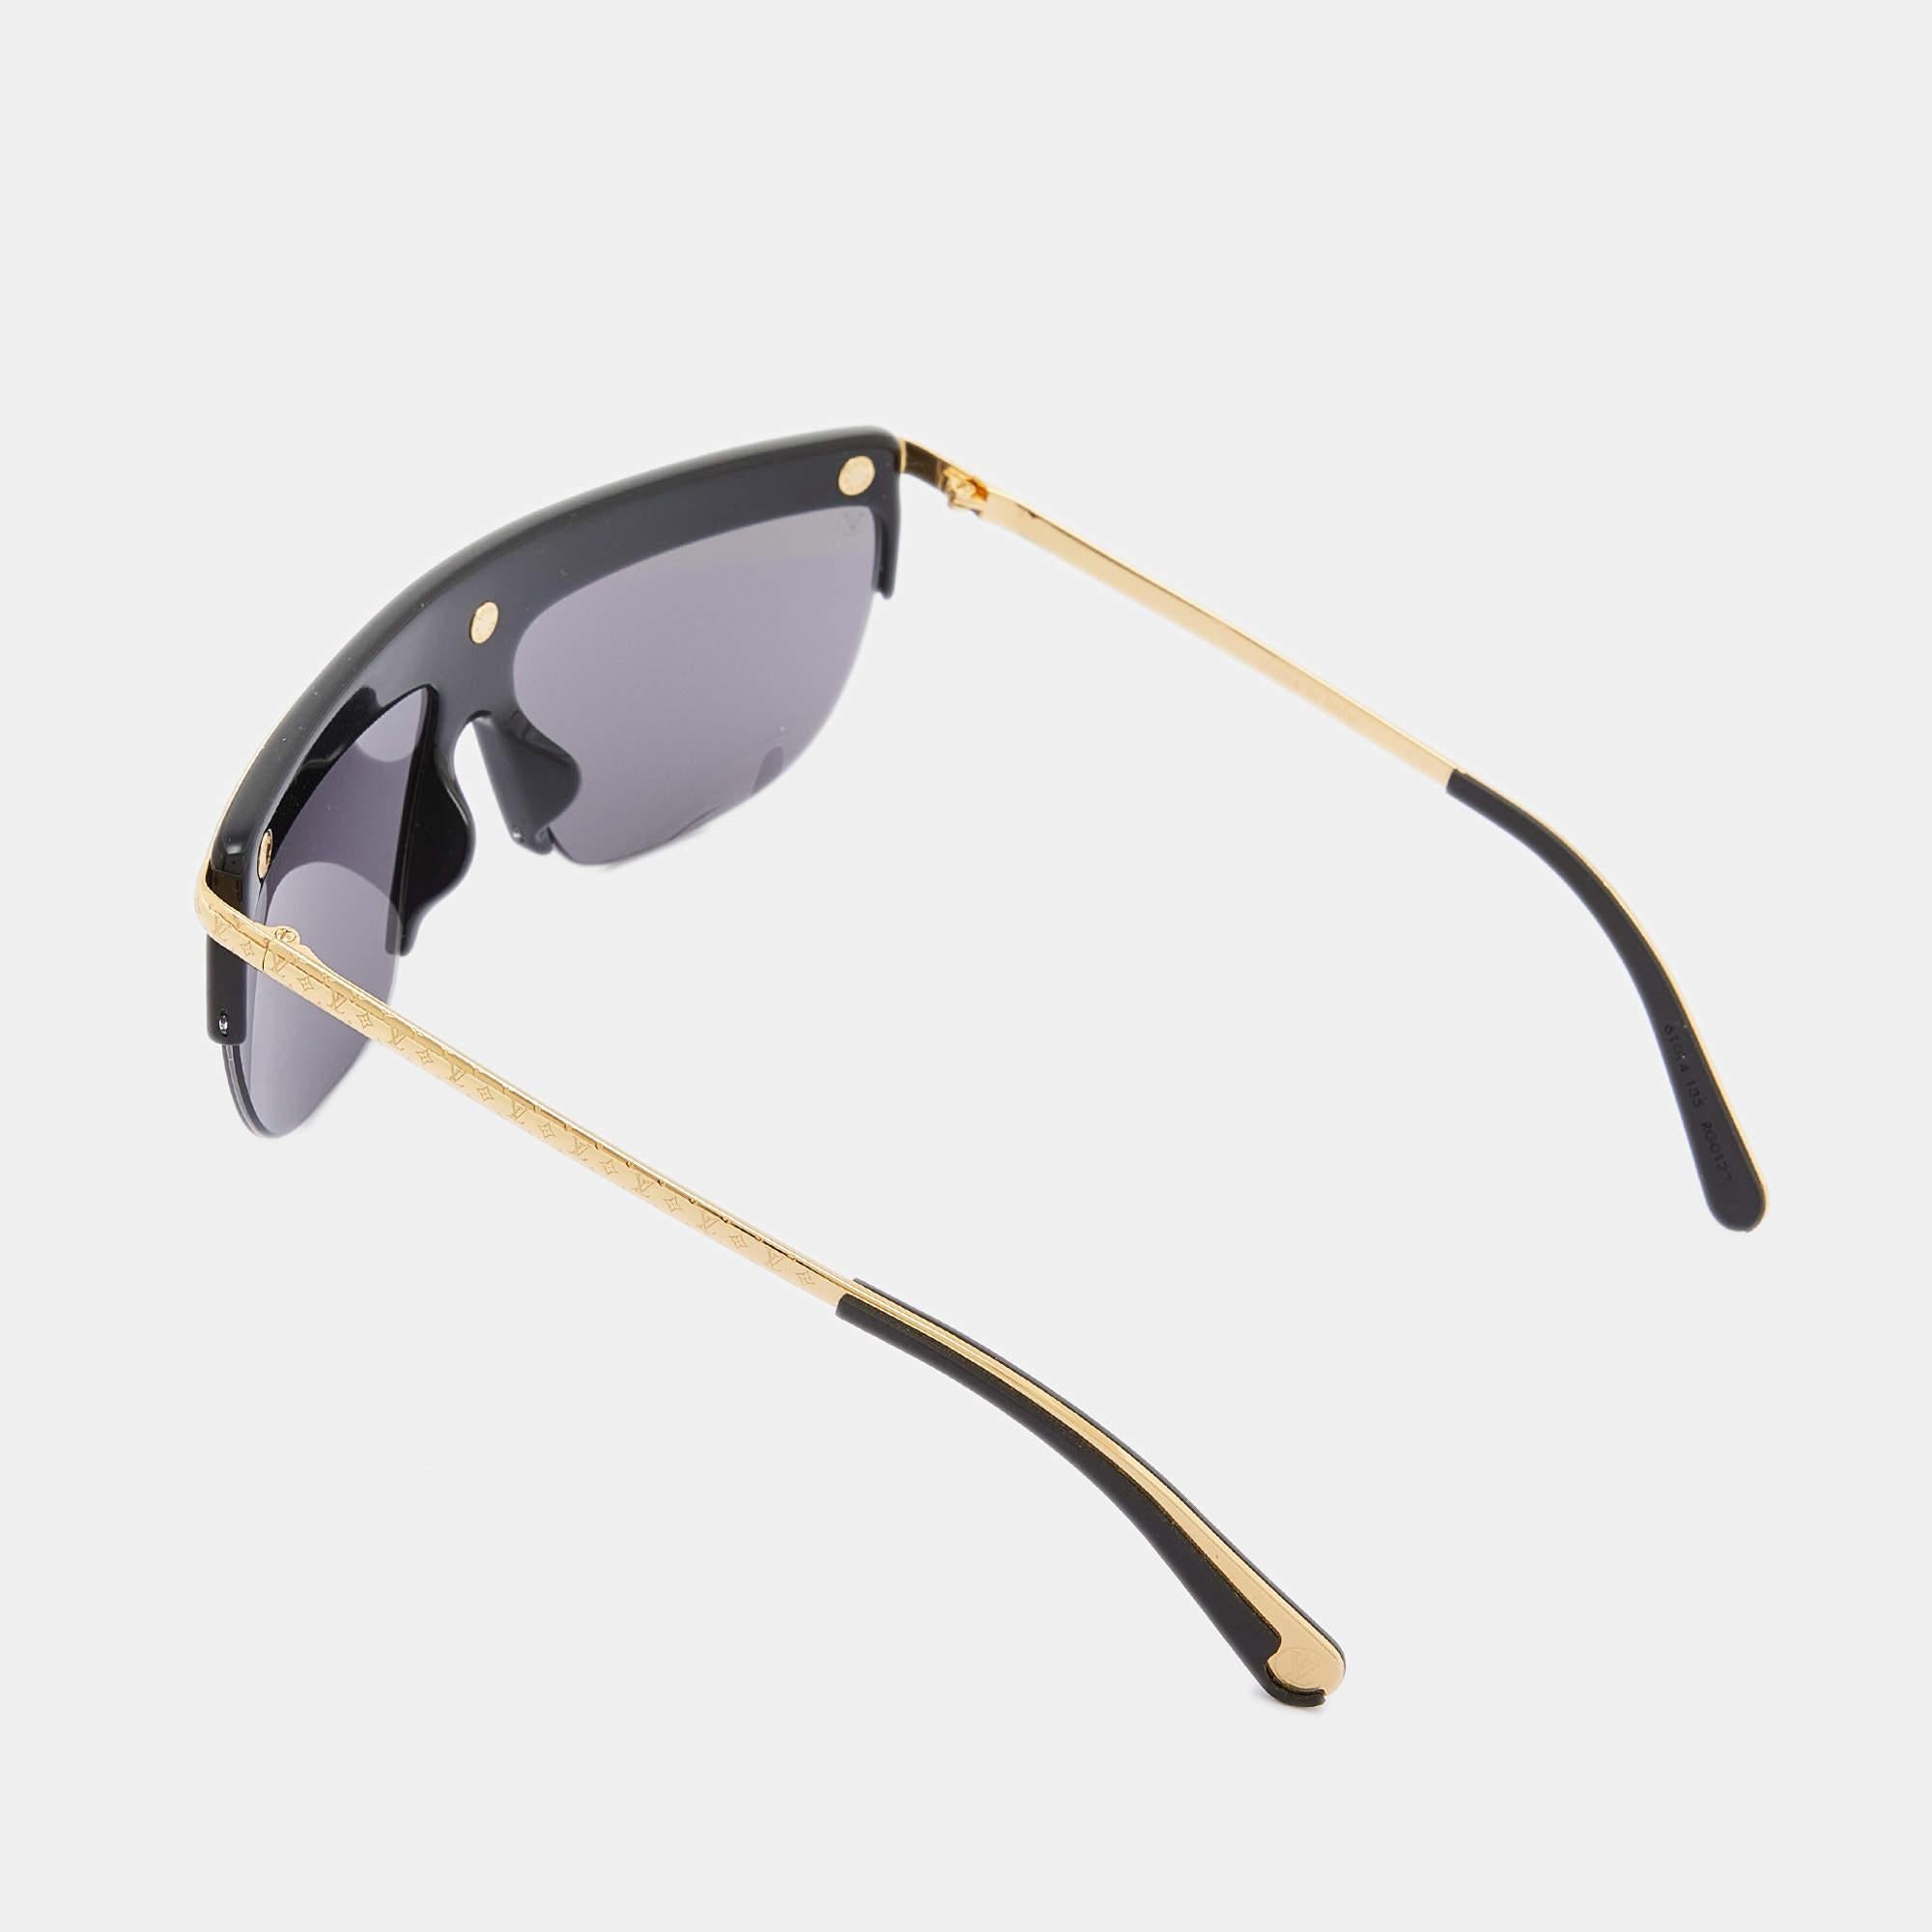 Embrace sunny days in full style with the help of this pair of Louis Vuitton sunglasses. Created with expertise, the luxe sunglasses feature a well-designed frame and high-grade lenses that are equipped to protect your eyes.

